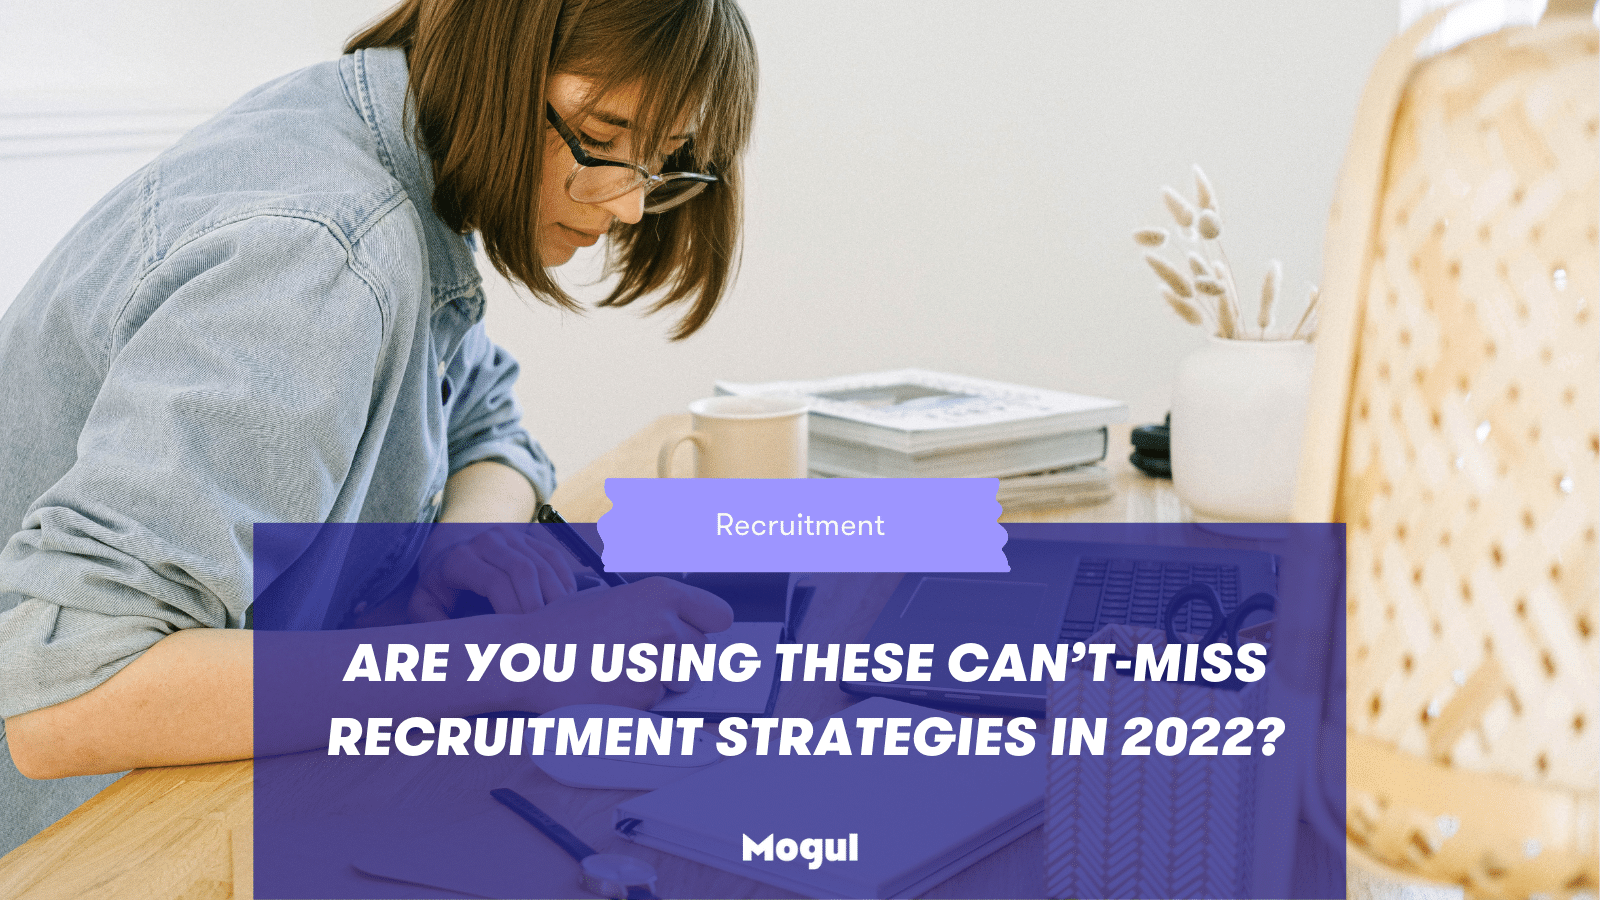 Are You Using These Can’t-Miss Recruitment Strategies in 2022?